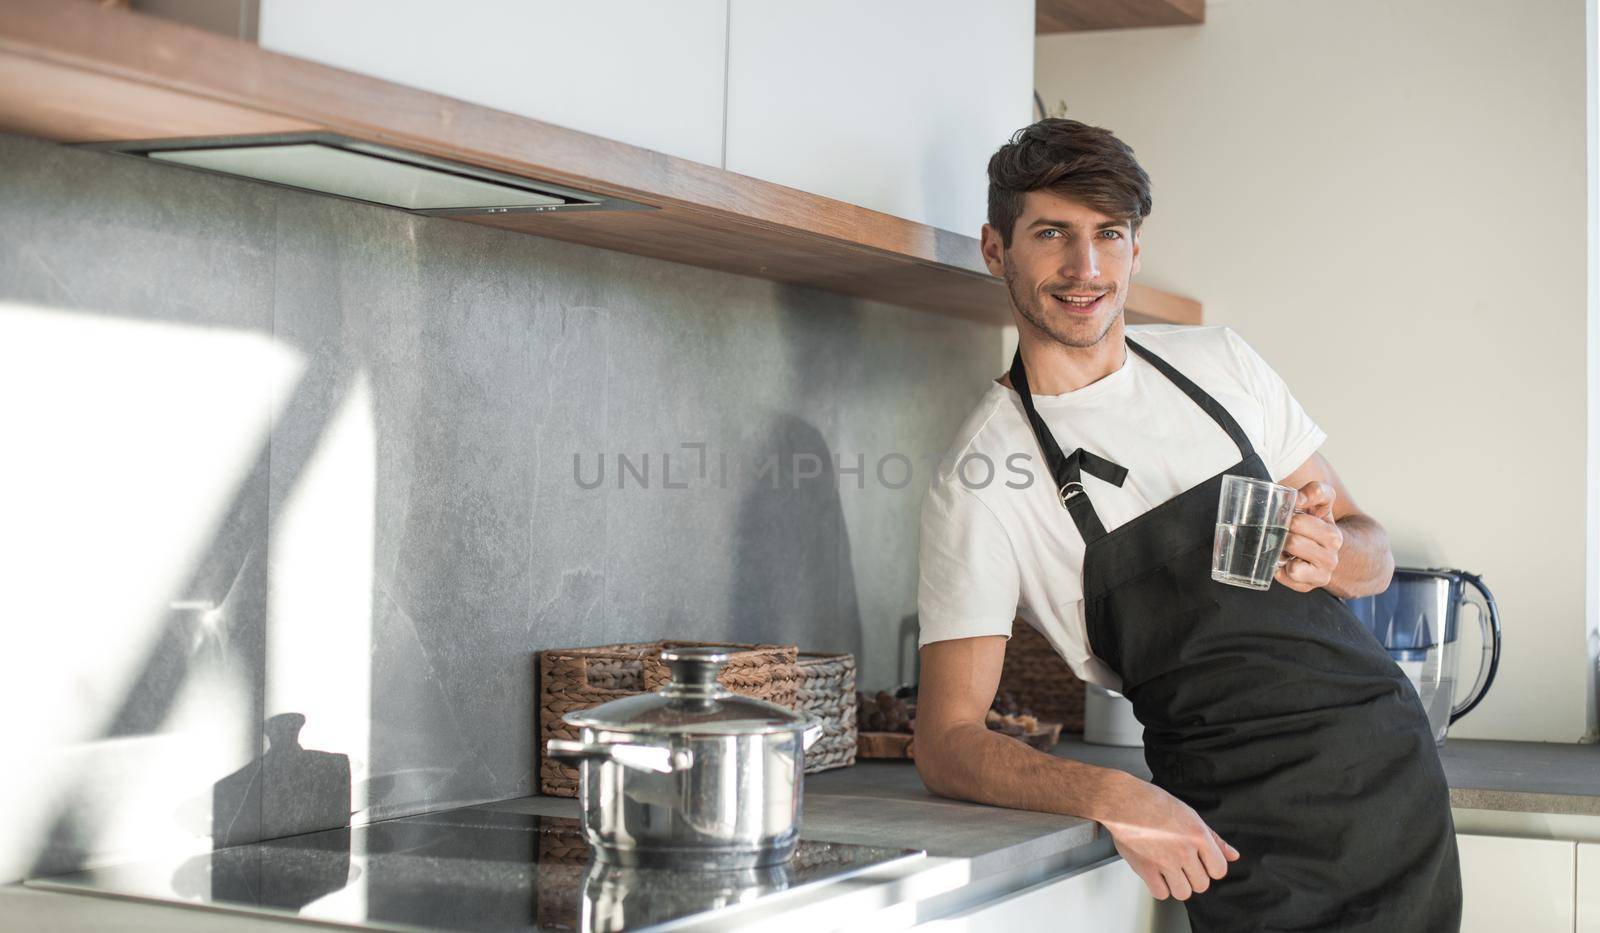 smiling young man with a glass of water standing in the home kitchen. photo with copy space